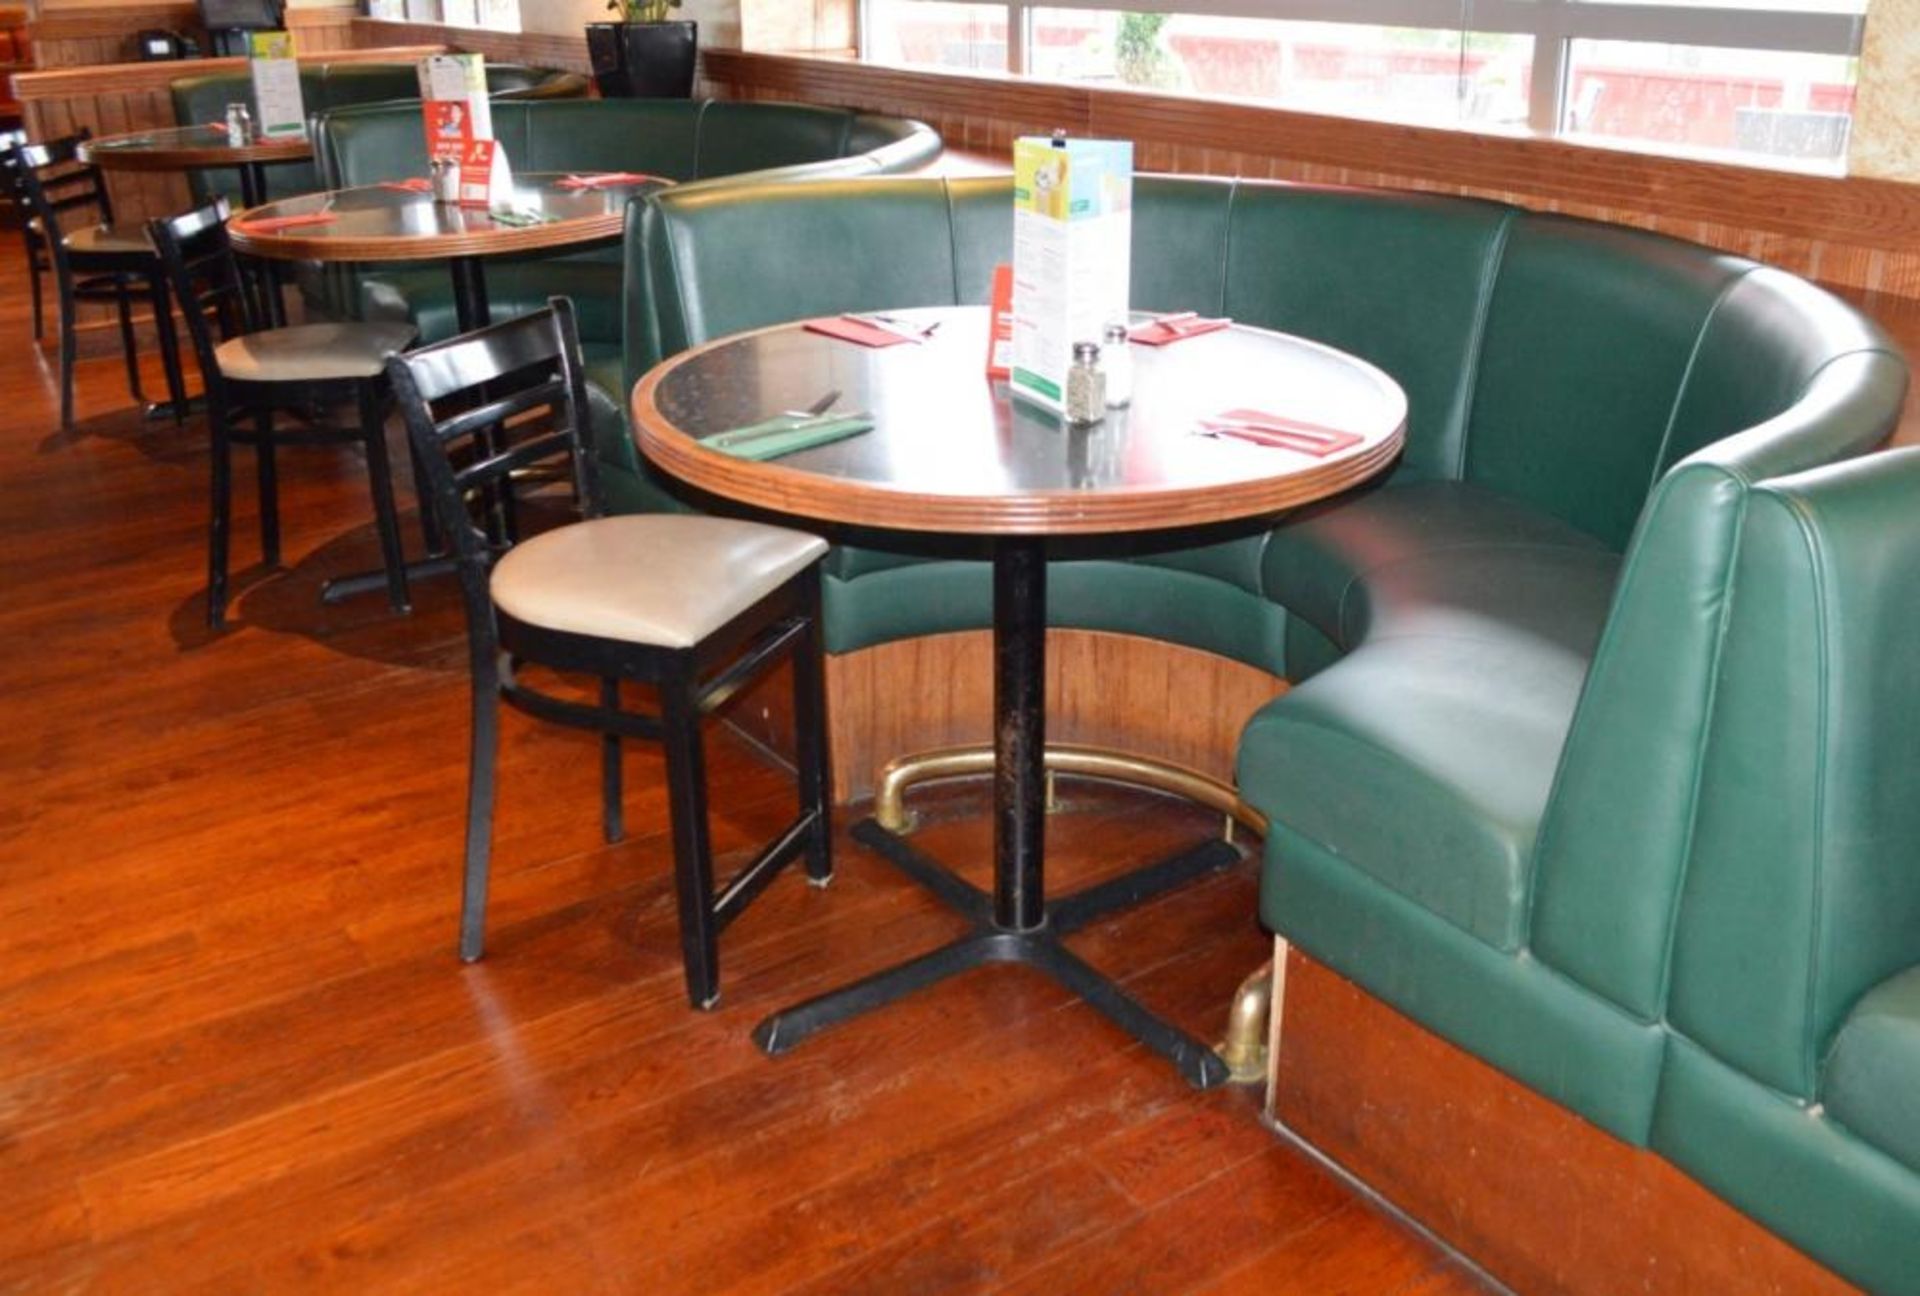 2 x Round Restaurant Dining Tables With Granite Effect Surface, Wooden Edging and Cast Iron Bases - - Image 3 of 4